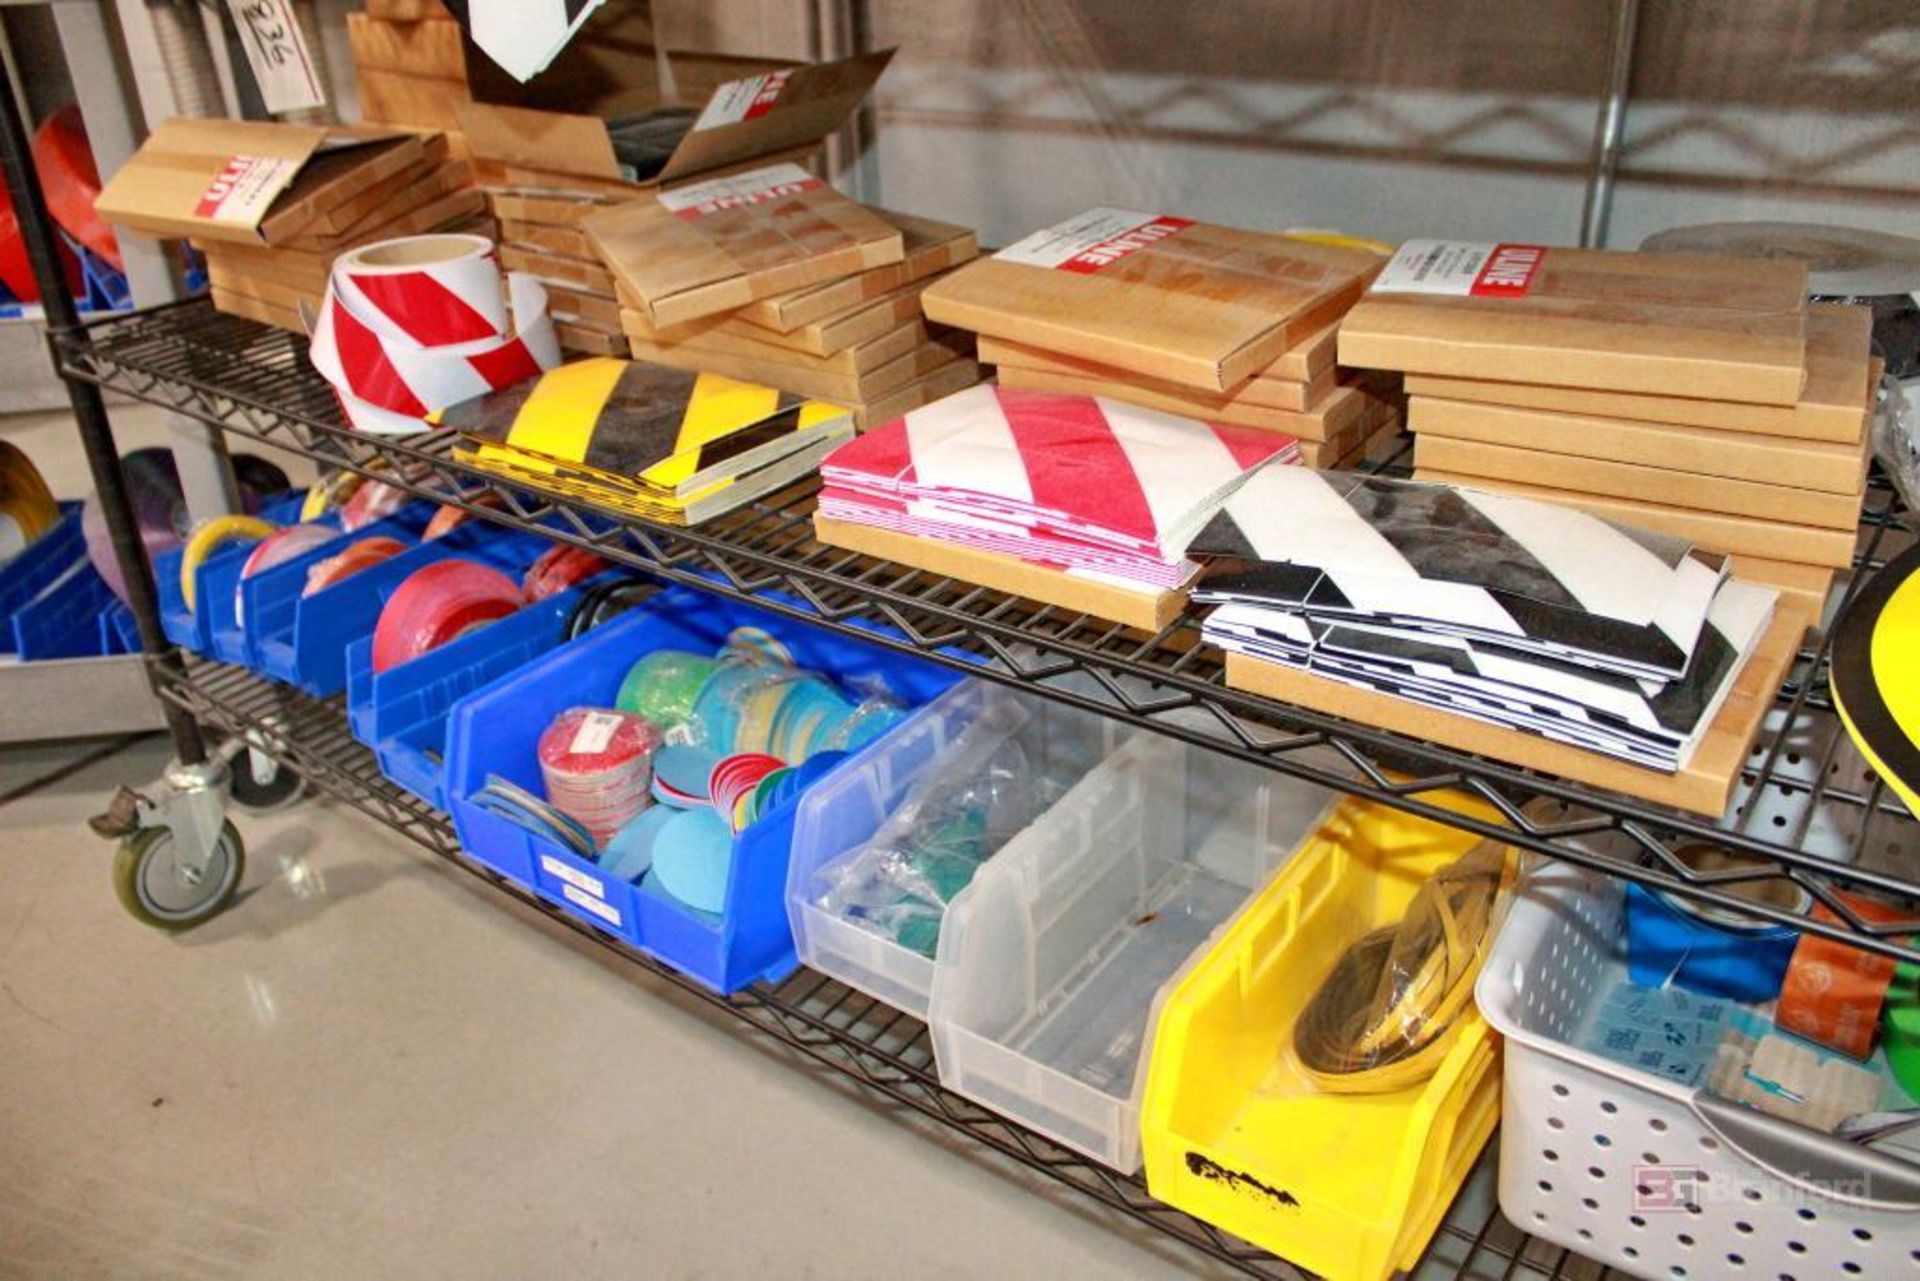 Uline Rolling Rack & Shop Cart with Contents - Image 5 of 5